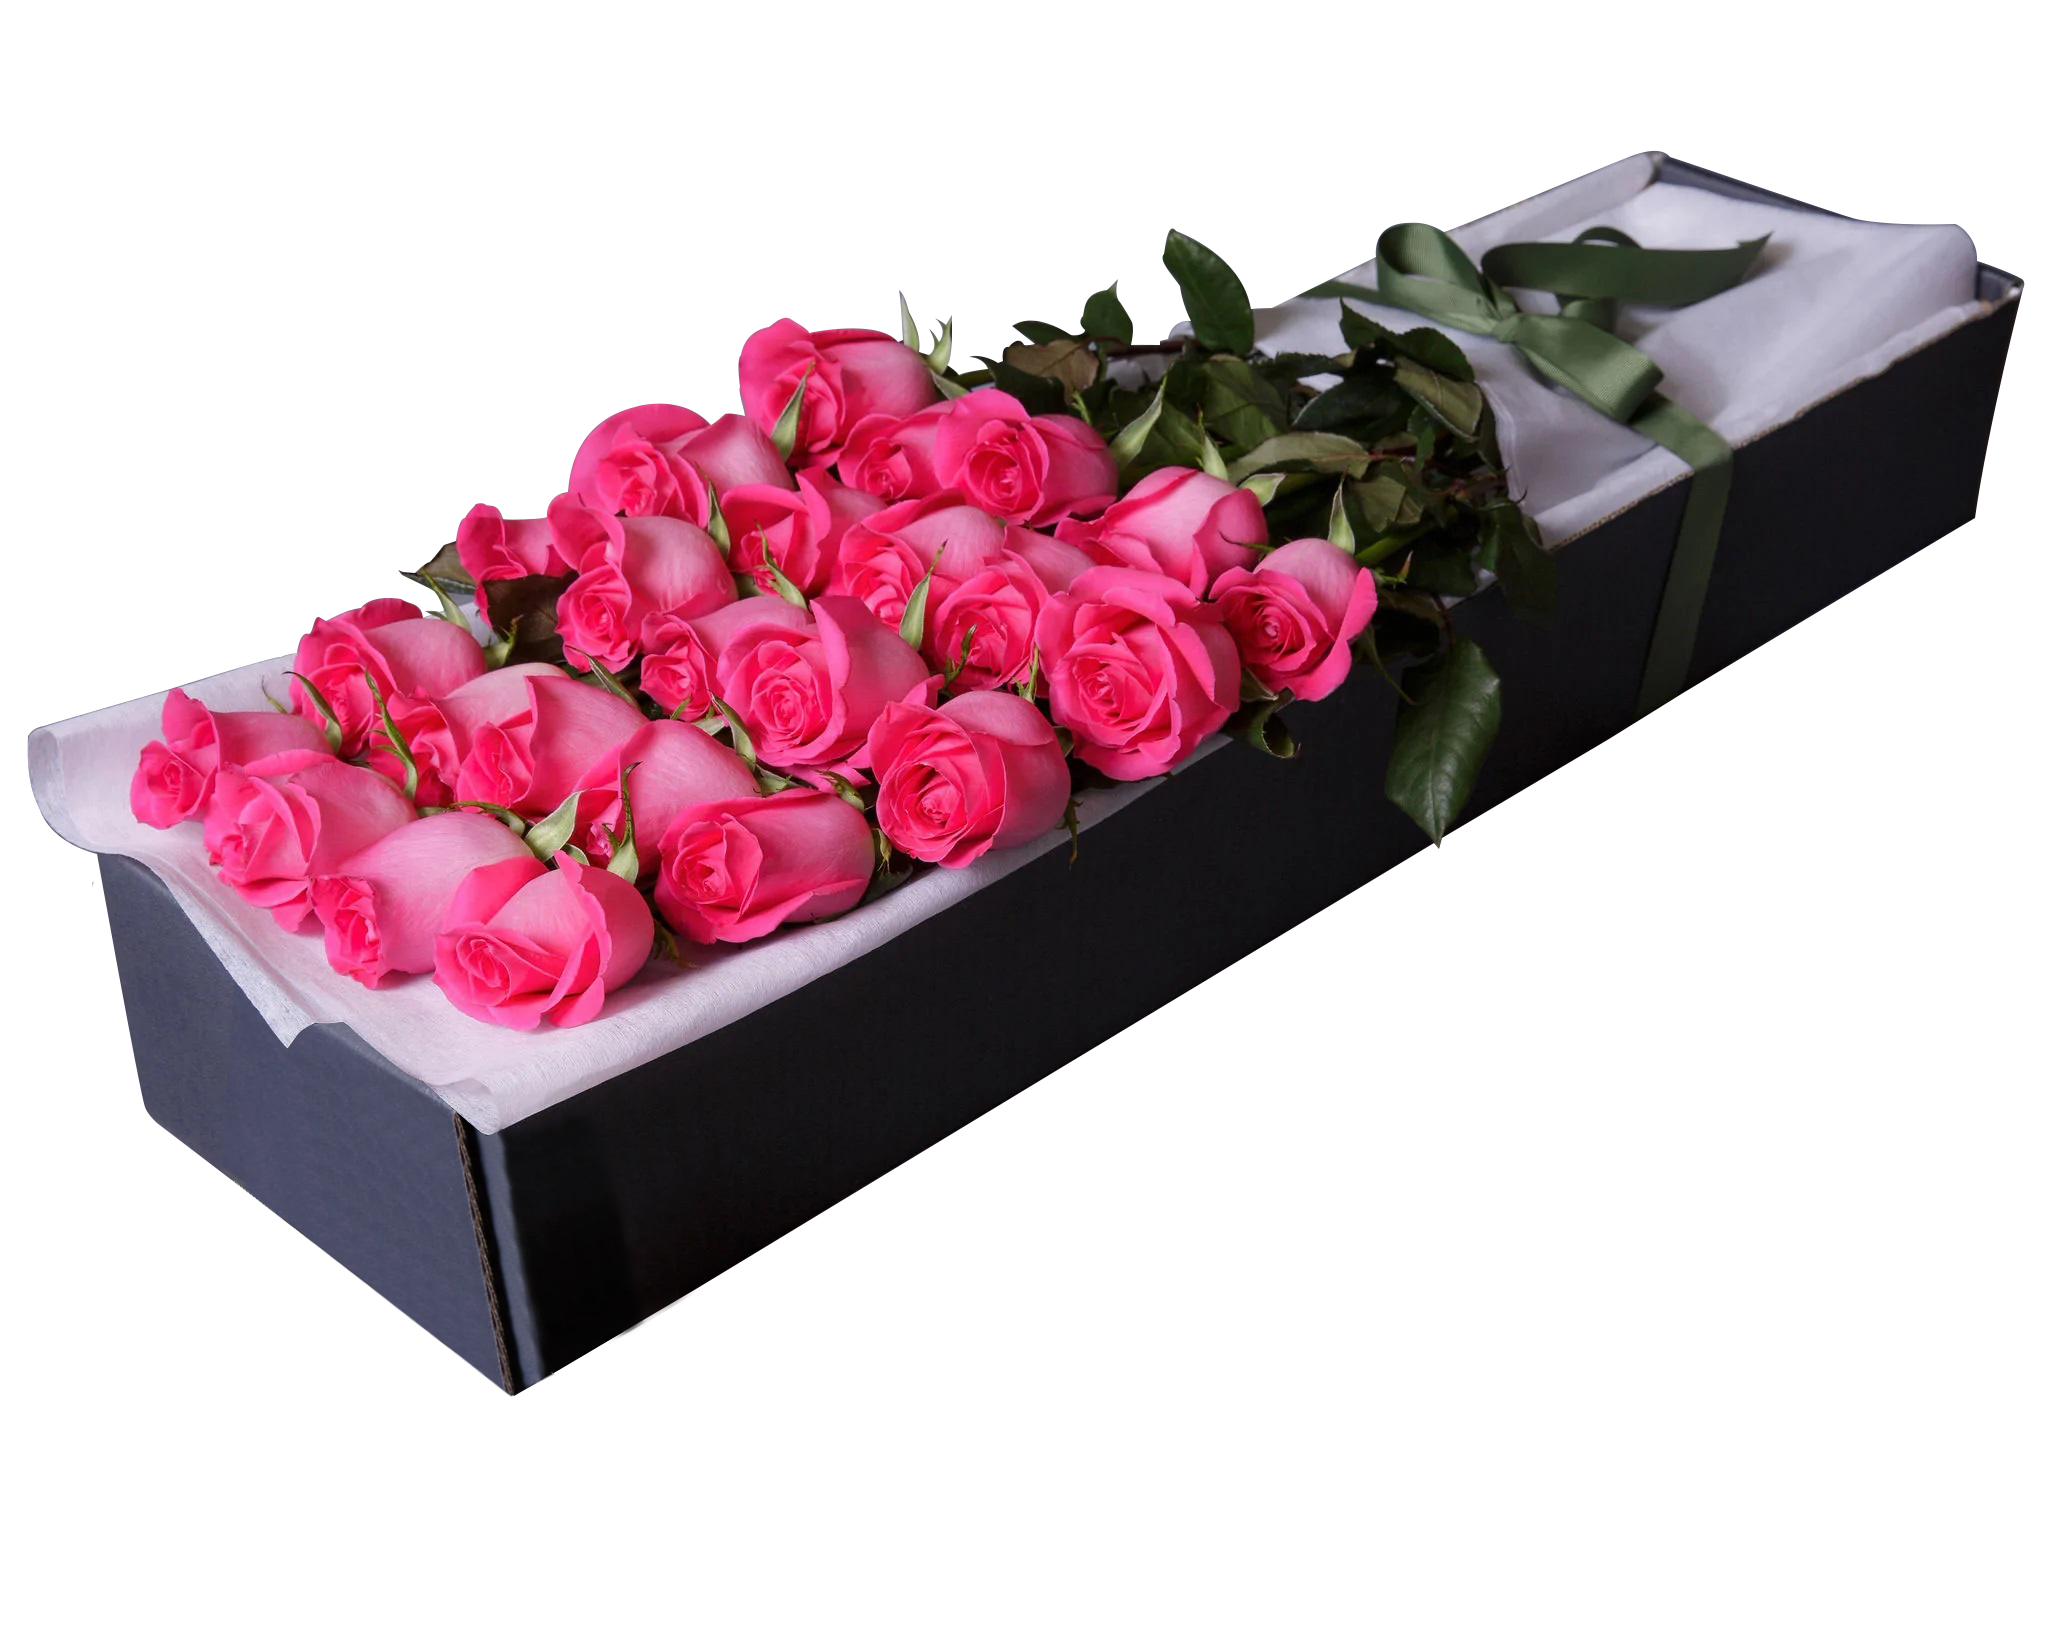 24 Pink Roses In Box Delivery To Manila Philippines